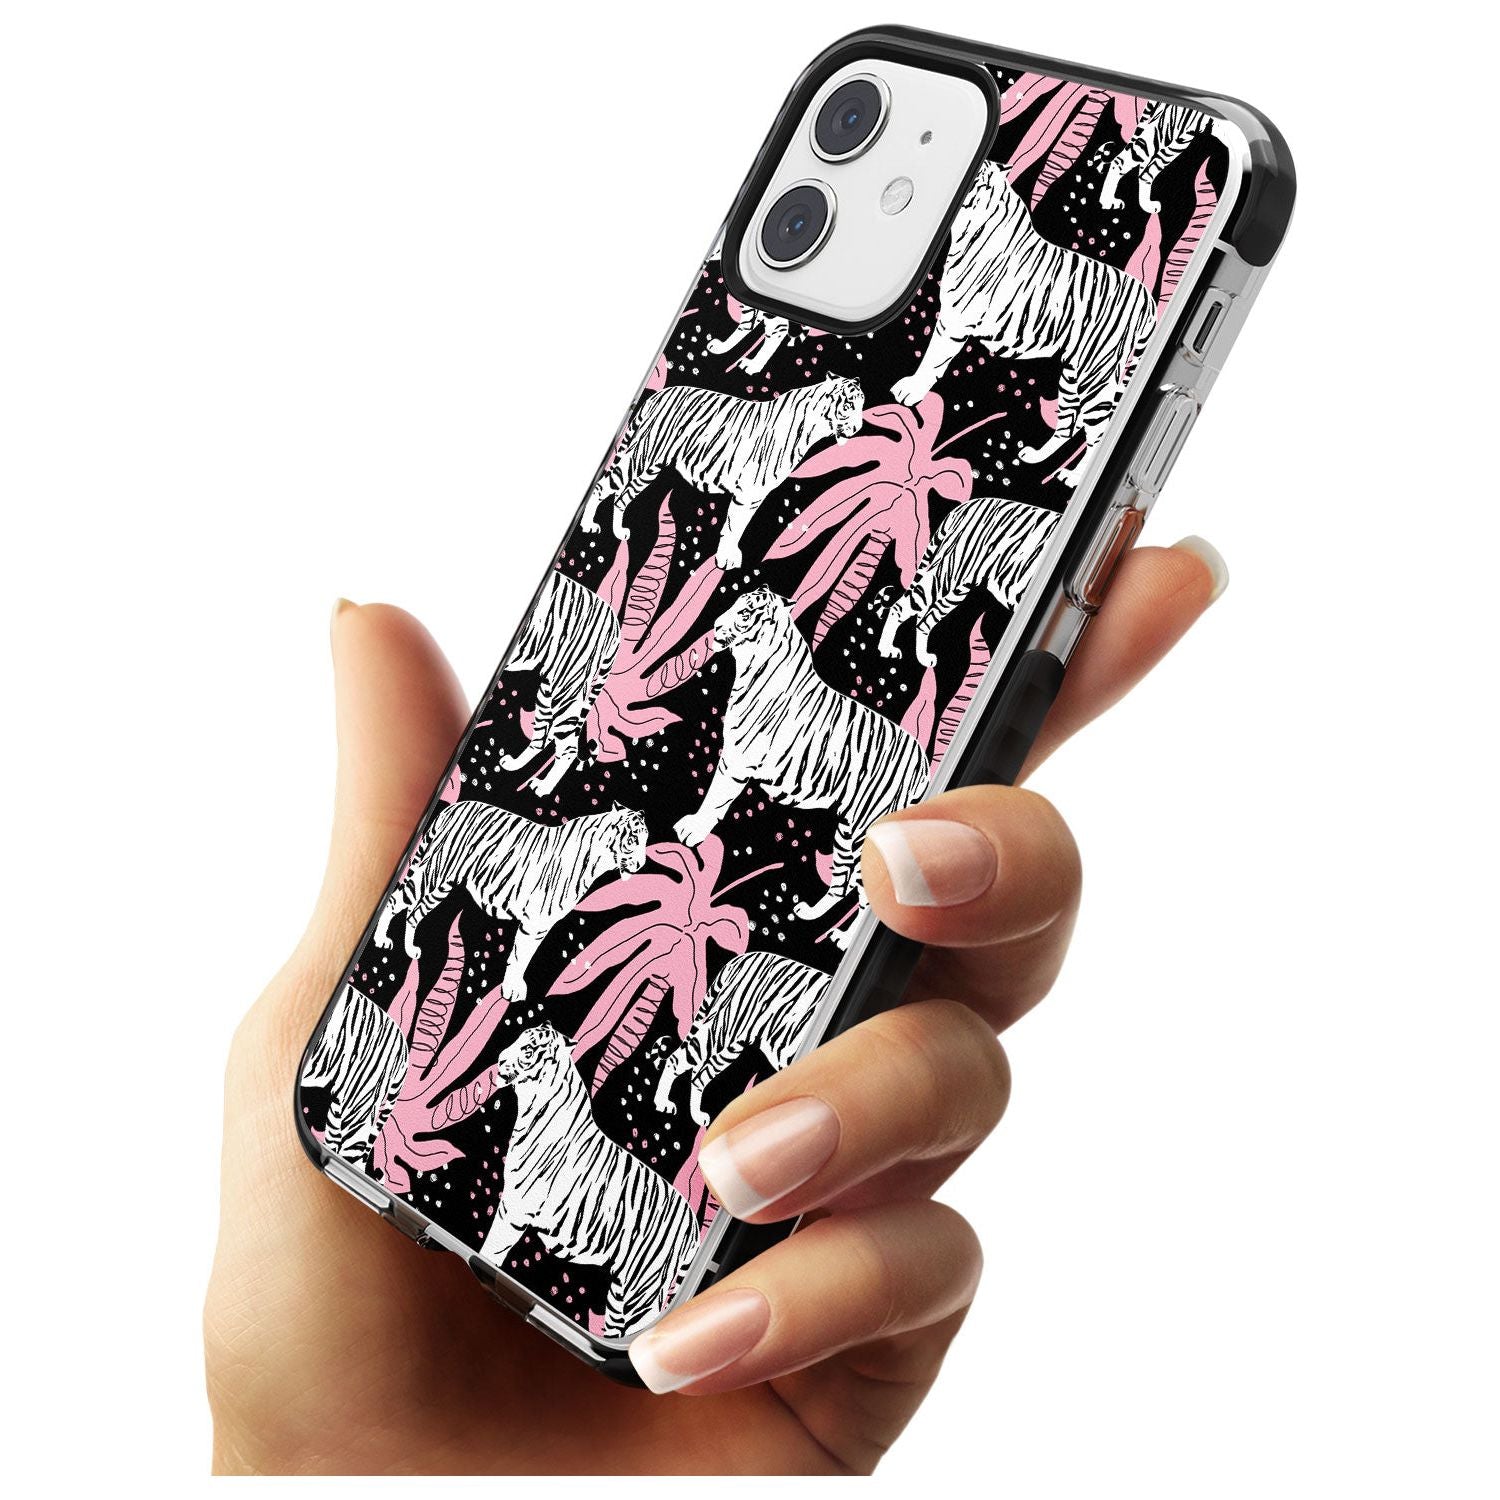 White Tigers on Black Pattern Black Impact Phone Case for iPhone 11